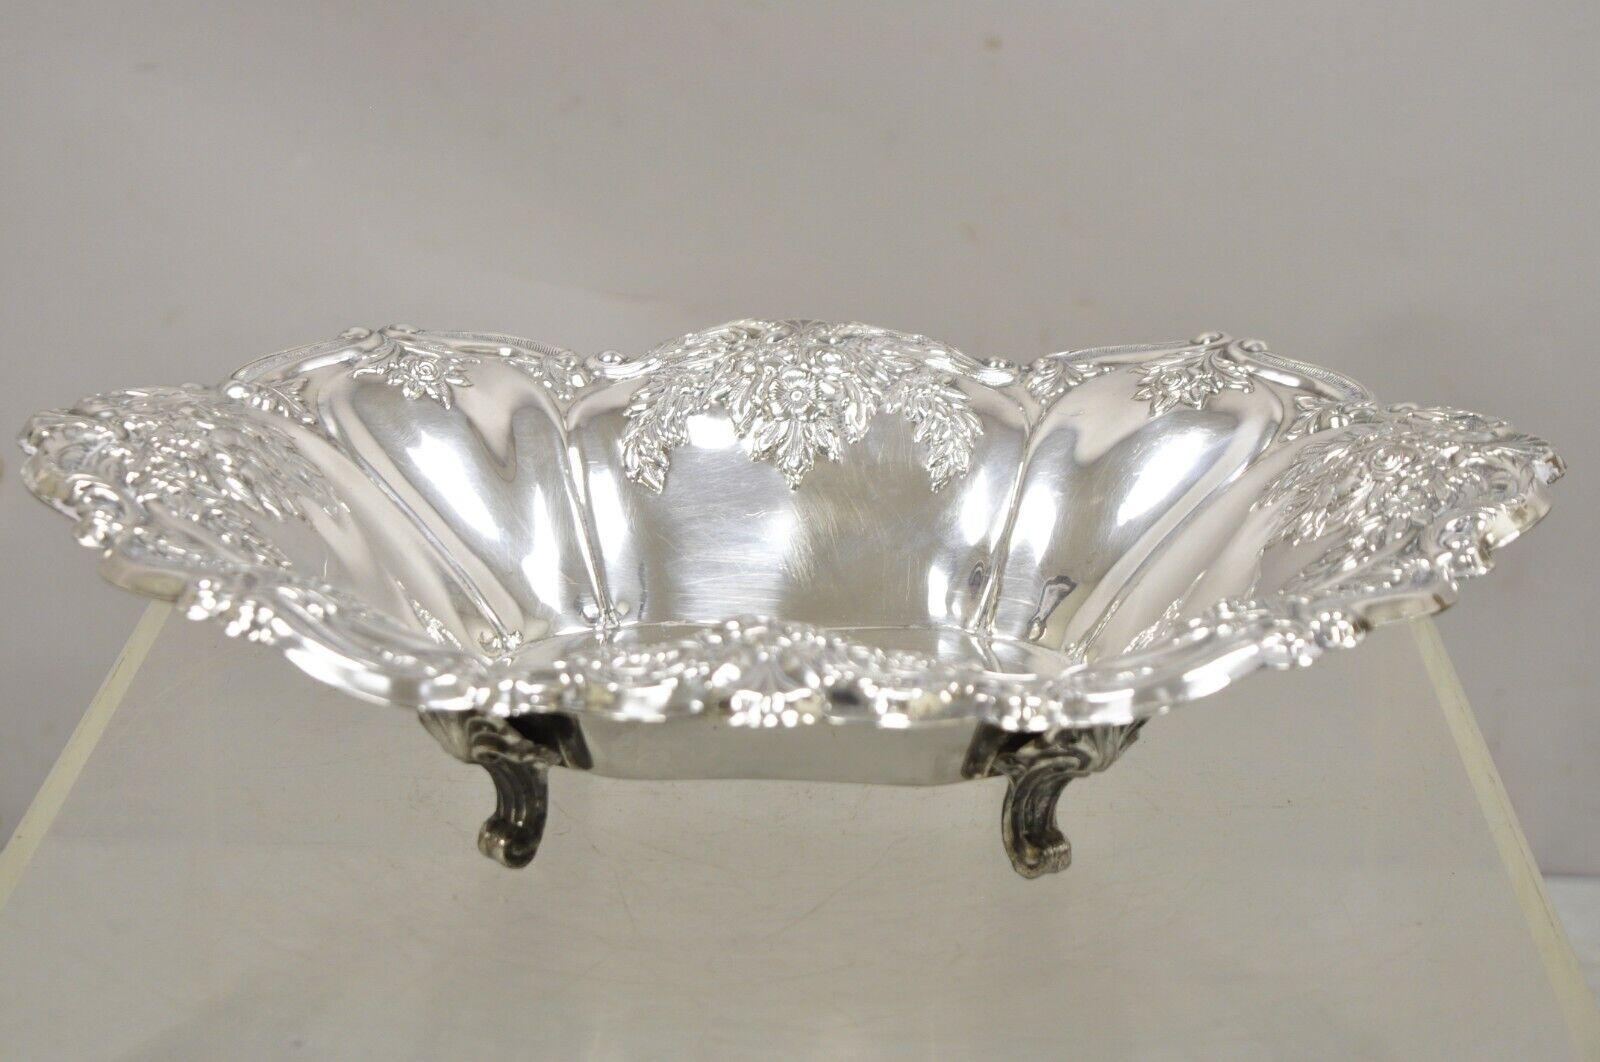 Antique Victorian silver plated floral repousse trinket dish serving bowl platter. Item feature a shapely form, leafy floral repousse throughout, raised on small ornate feet, original label, very nice antique item, quality craftsmanship, great style